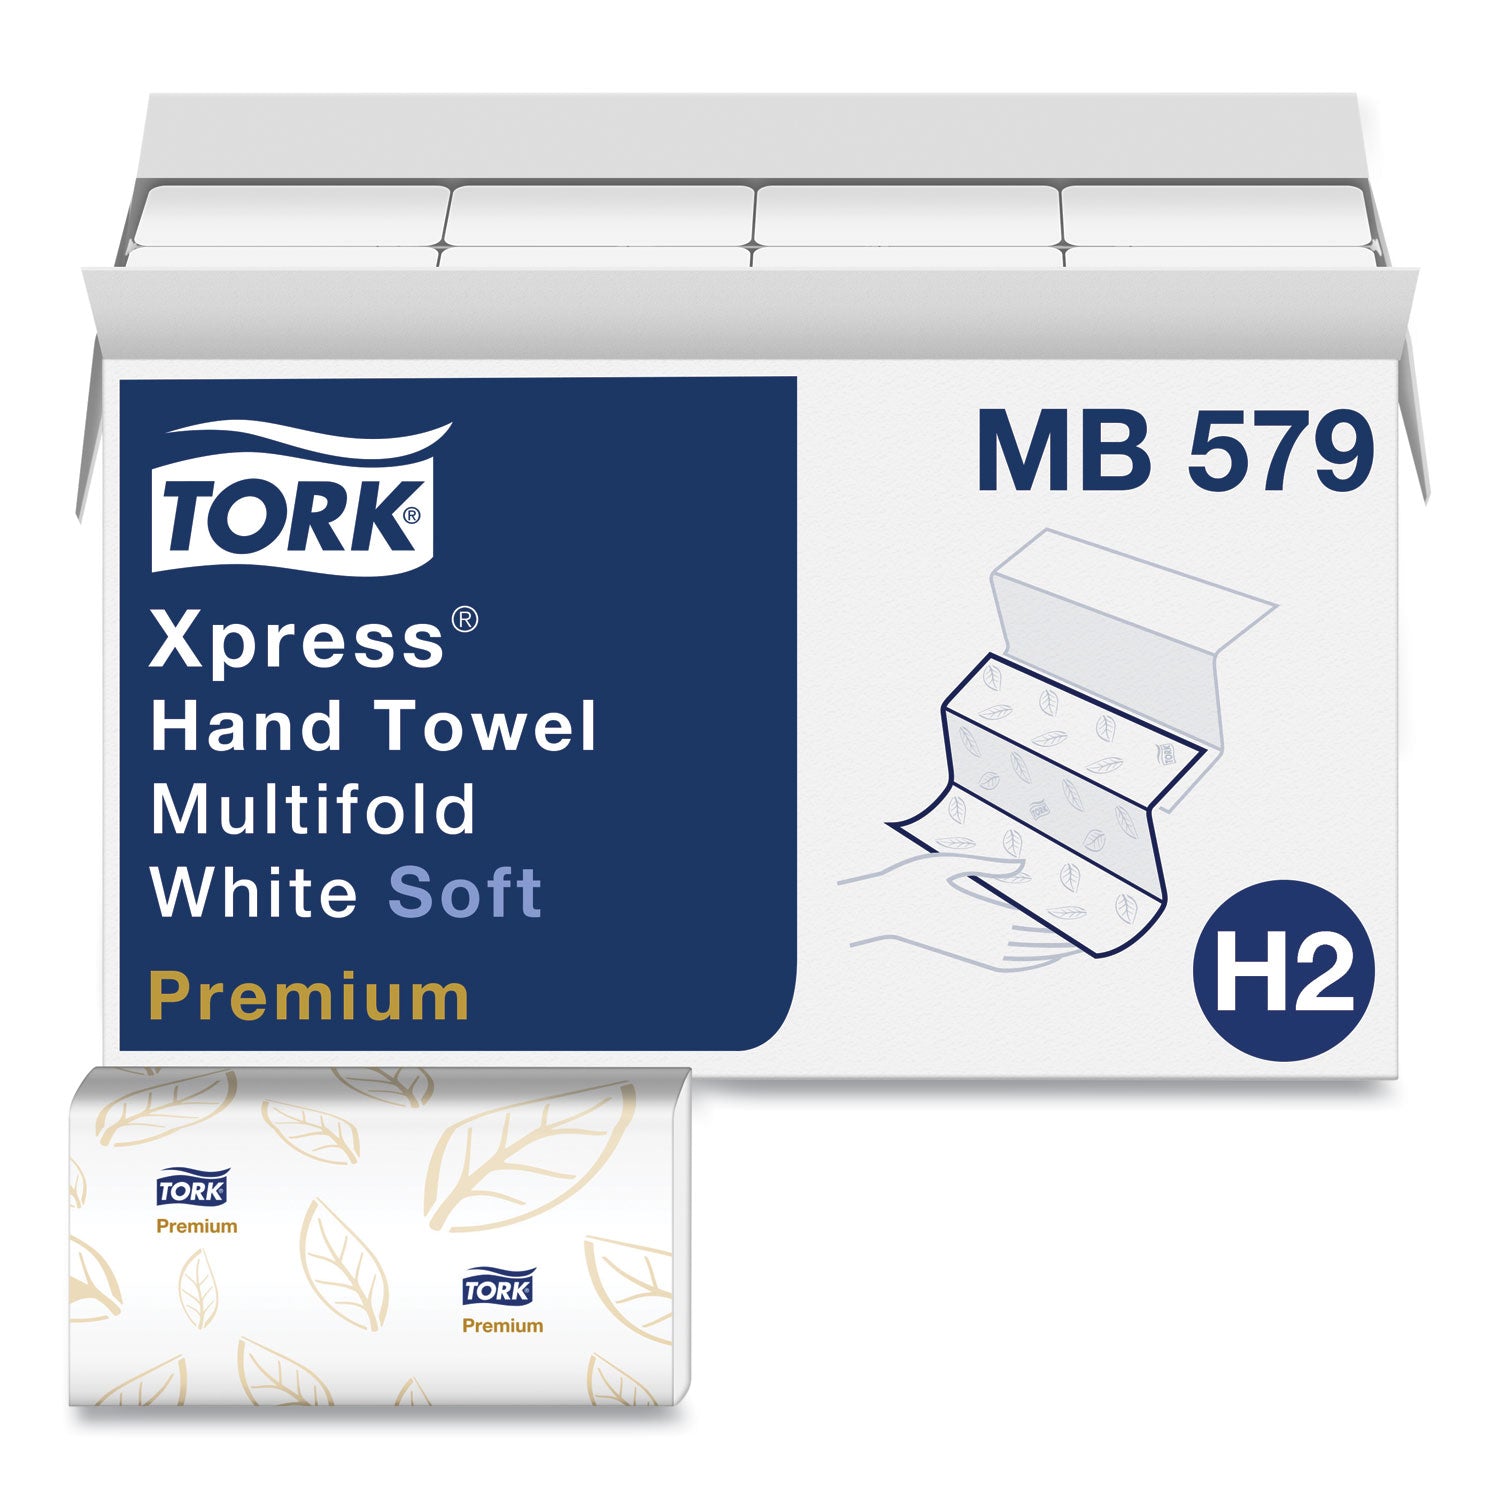 premium-soft-xpress-3-panel-multifold-hand-towels-2-ply-913-x-95-white-with-blue-leaf-135-packs-16-packs-carton_trkmb579 - 1